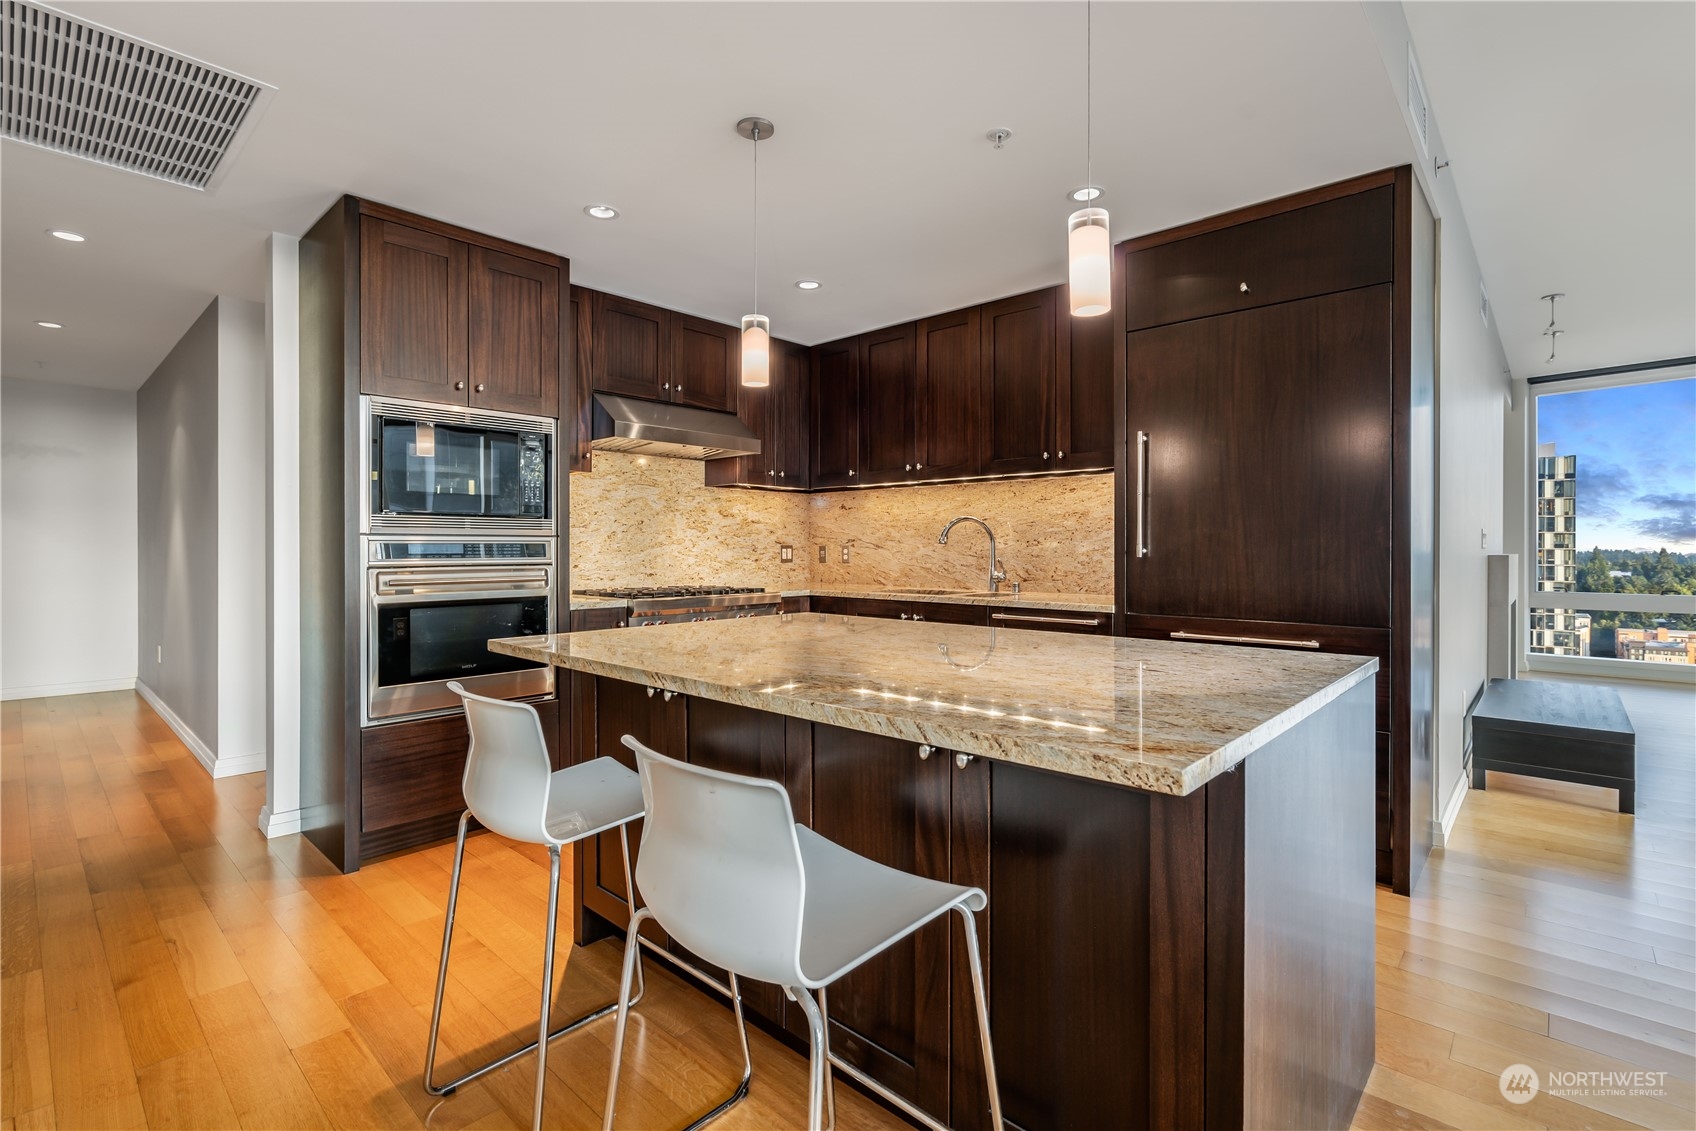 a kitchen with granite countertop kitchen island wooden cabinets and stainless steel appliances